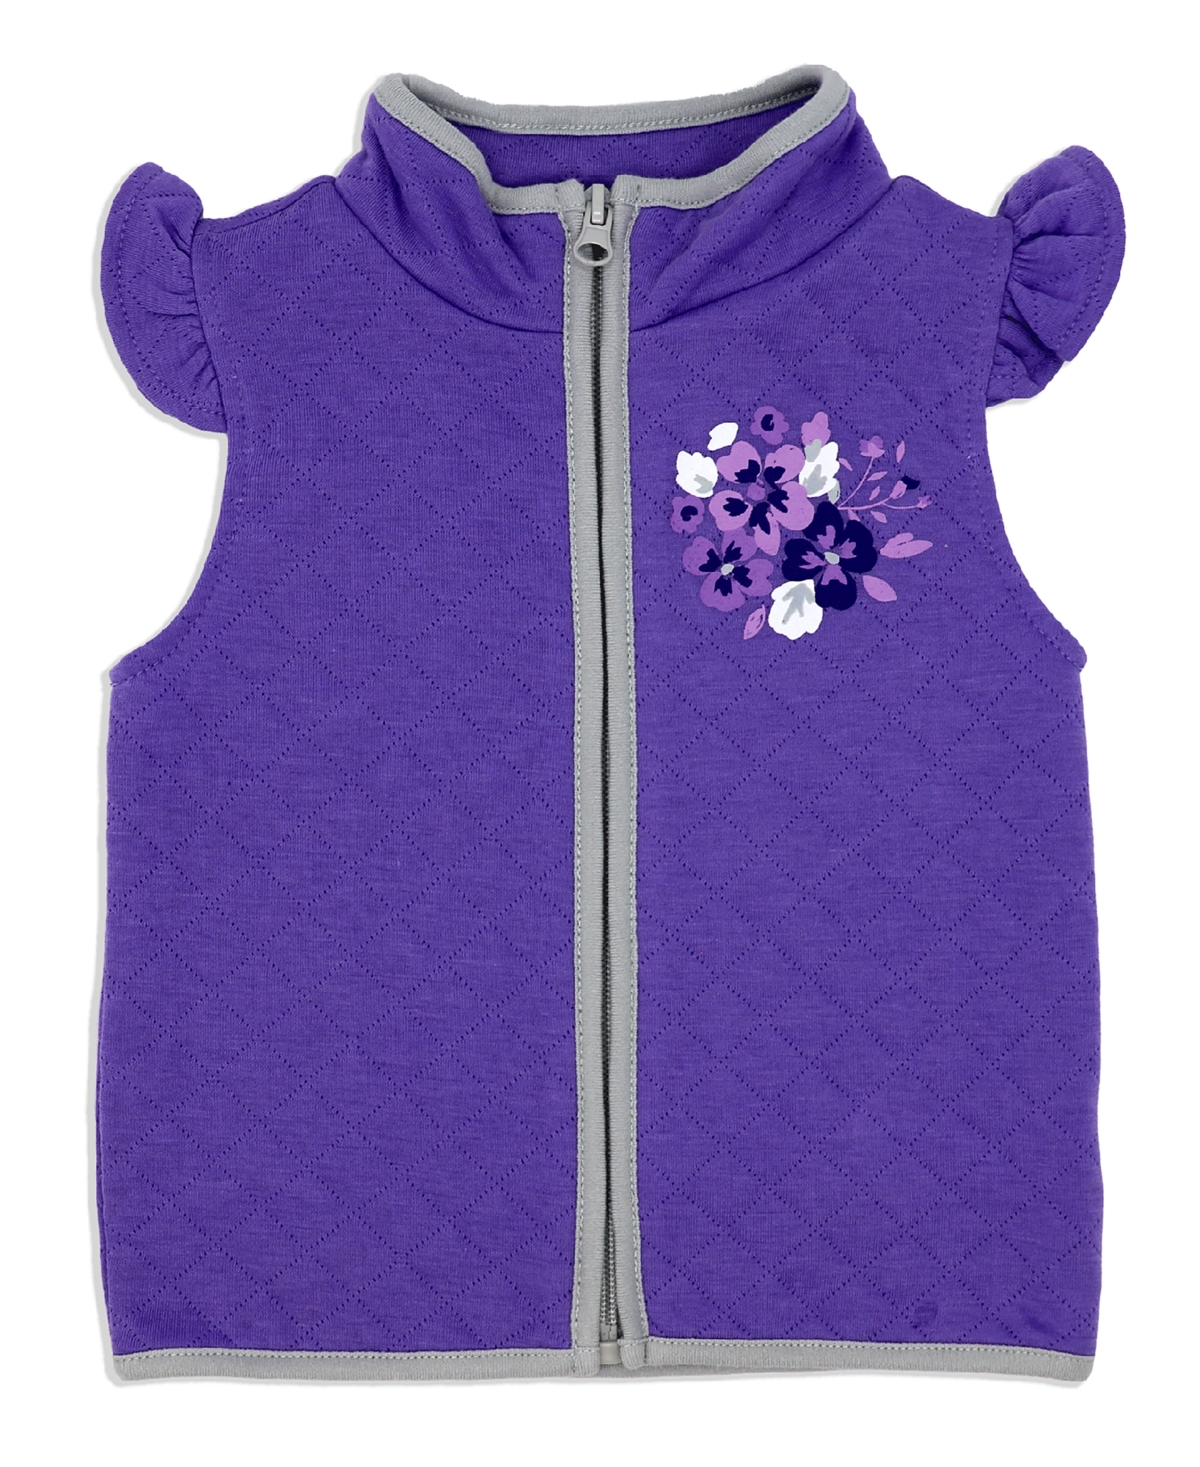 Shop Baby Mode Baby Girls Floral Bodysuit, Pants And Vest, 3 Piece Set In Purple